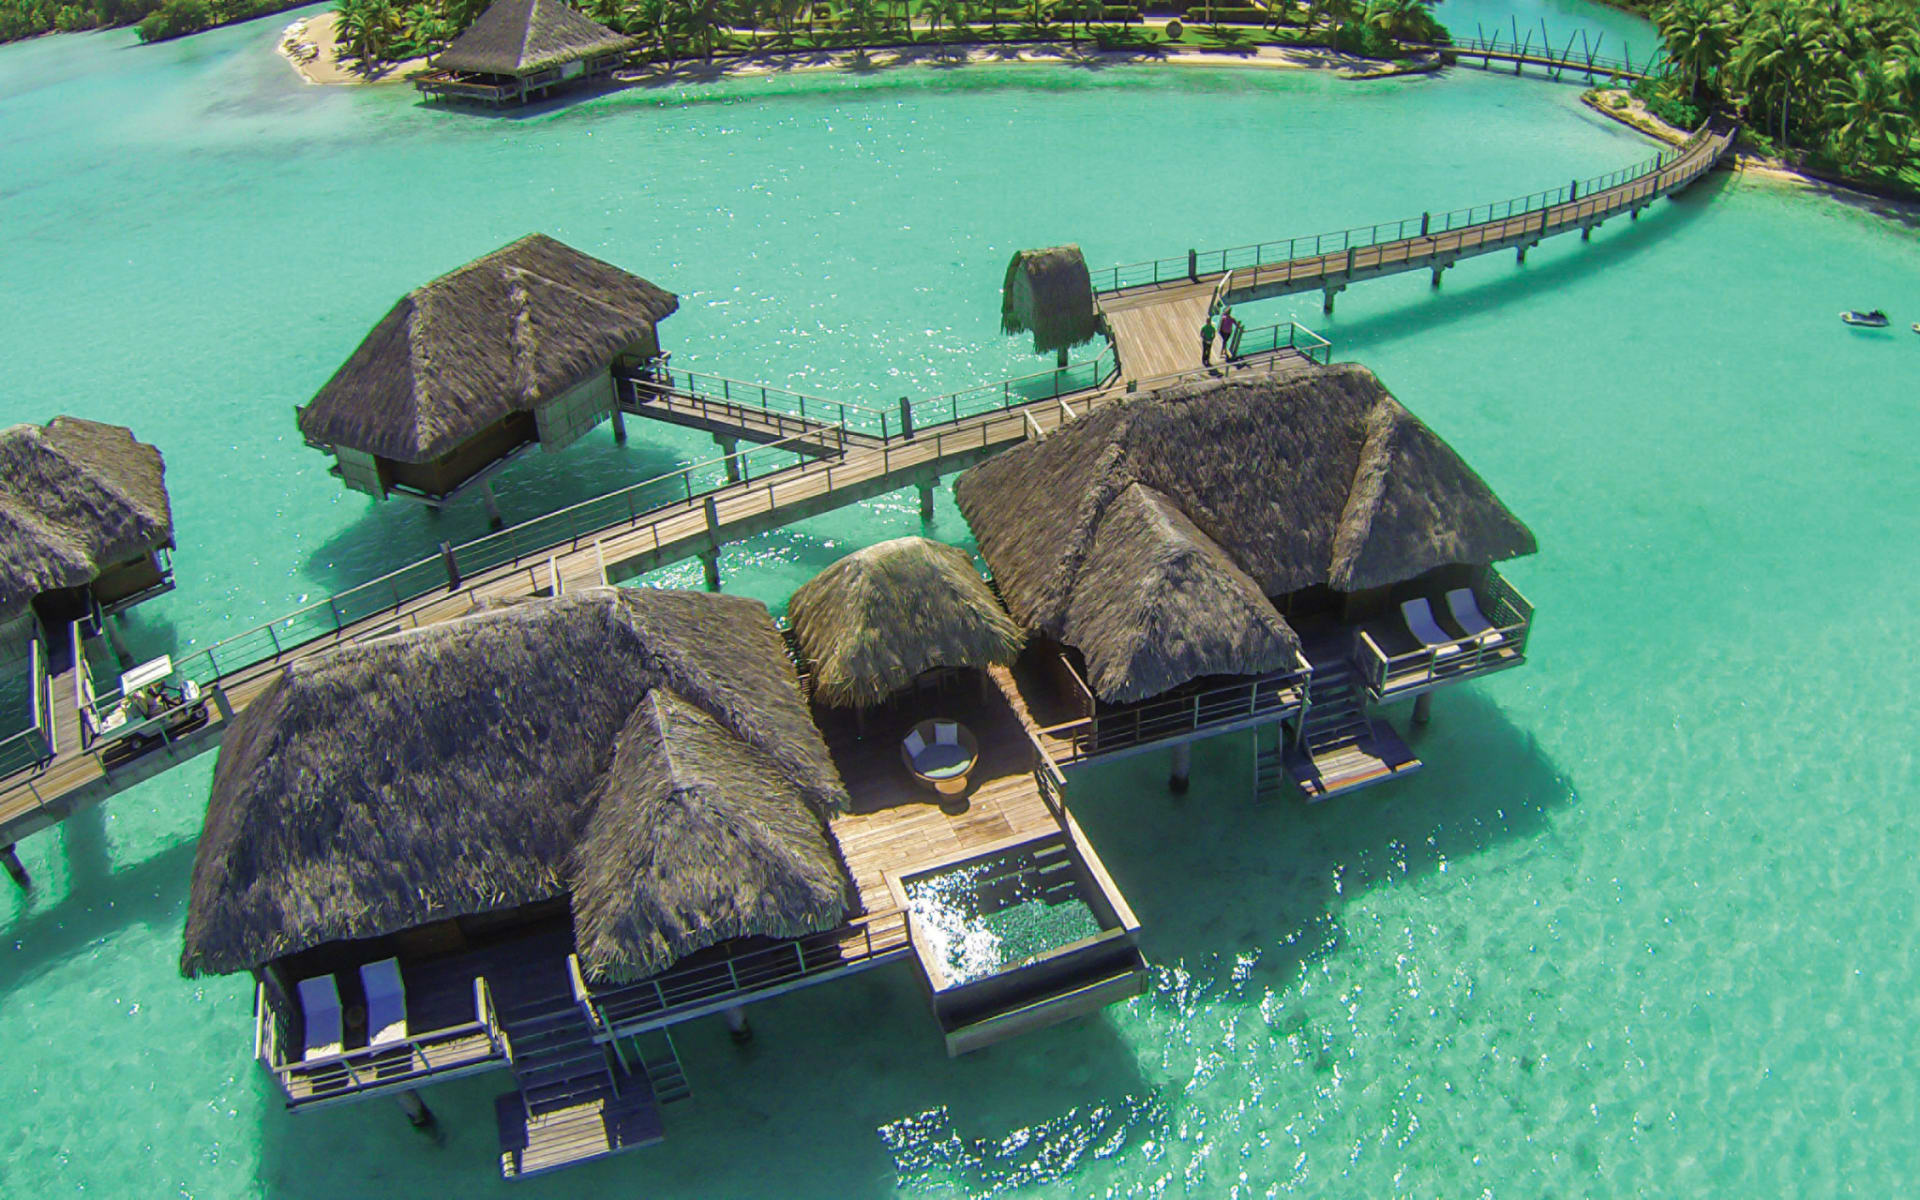 Large overwater bungalow with stunning blue waters below